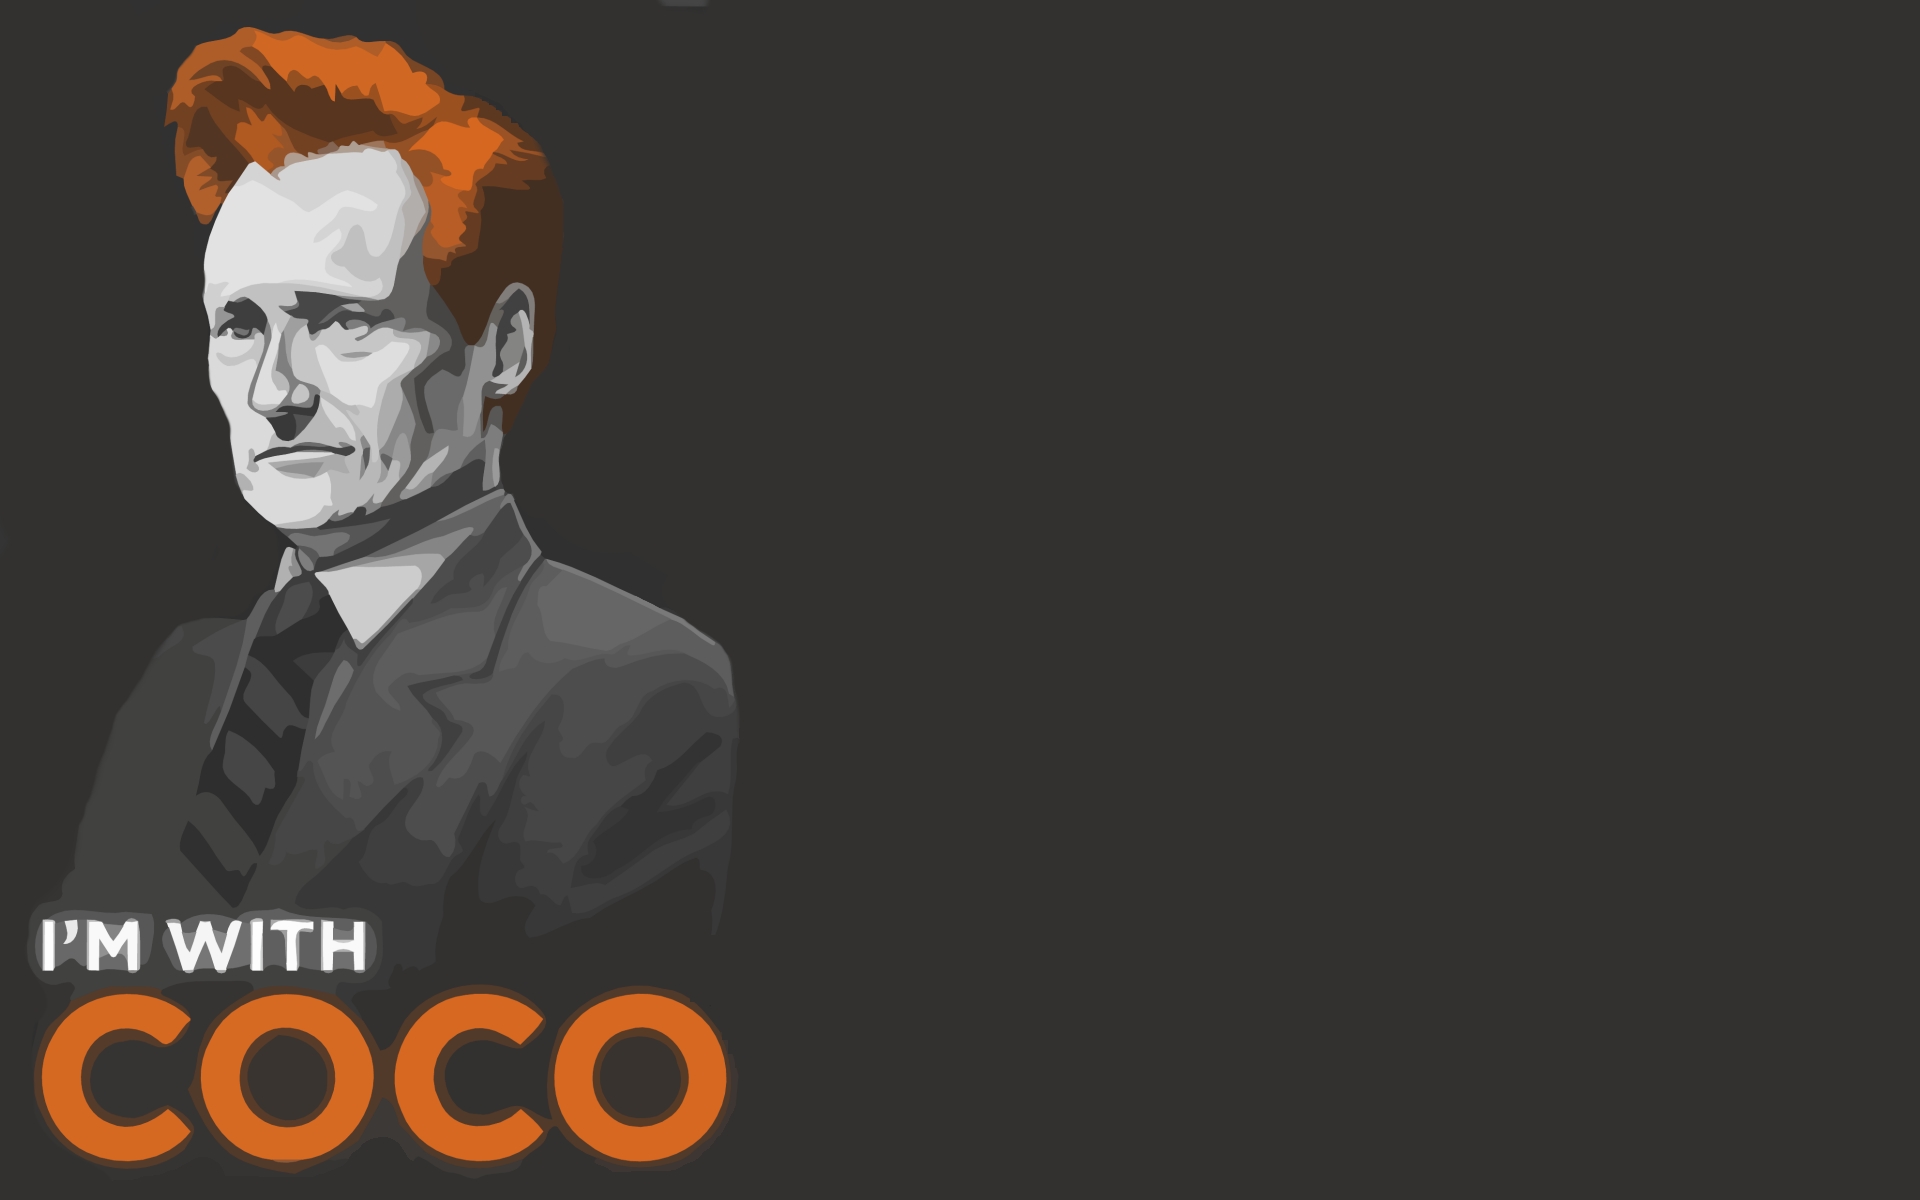 HD desktop wallpaper featuring a stylized artistic representation of a man with the caption 'I'm with COCO' on a grey background.